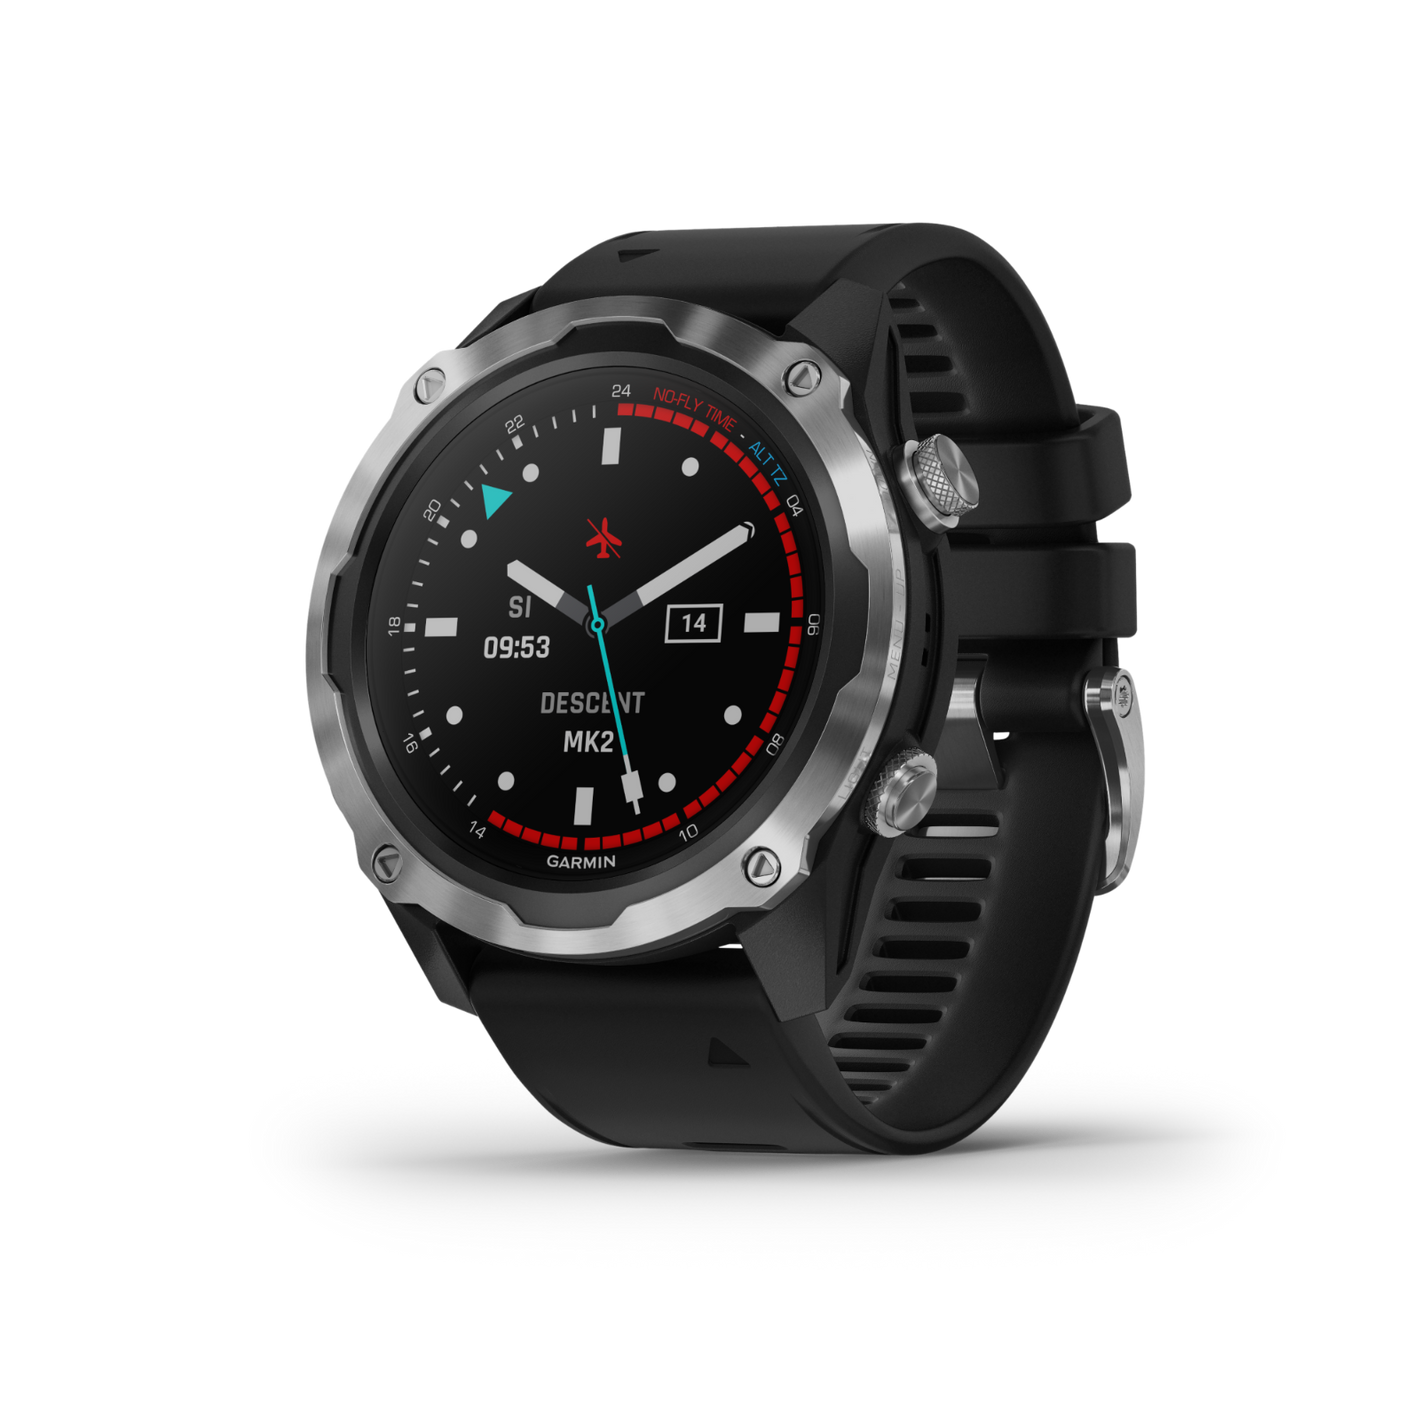 Garmin Descent Mk2 Watch-Style Stainless Steel with Black Band Dive Computer (010-02132-00)